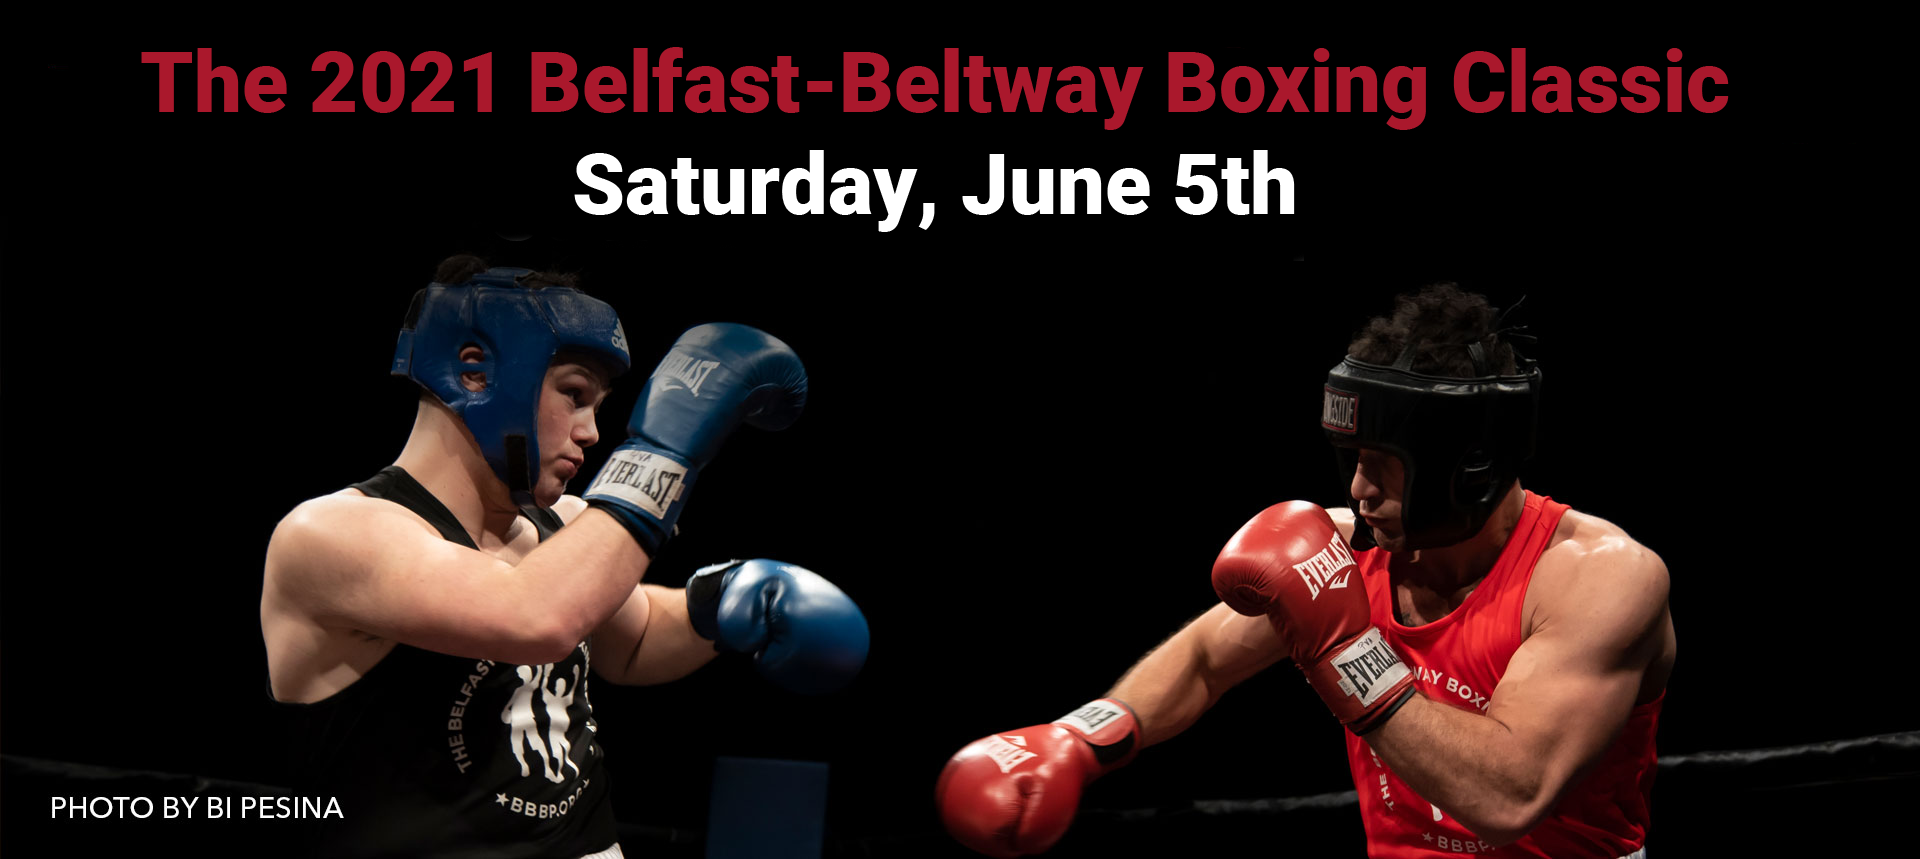 The 2021 Belfast-Beltway Boxing Classic Saturday, June 5th